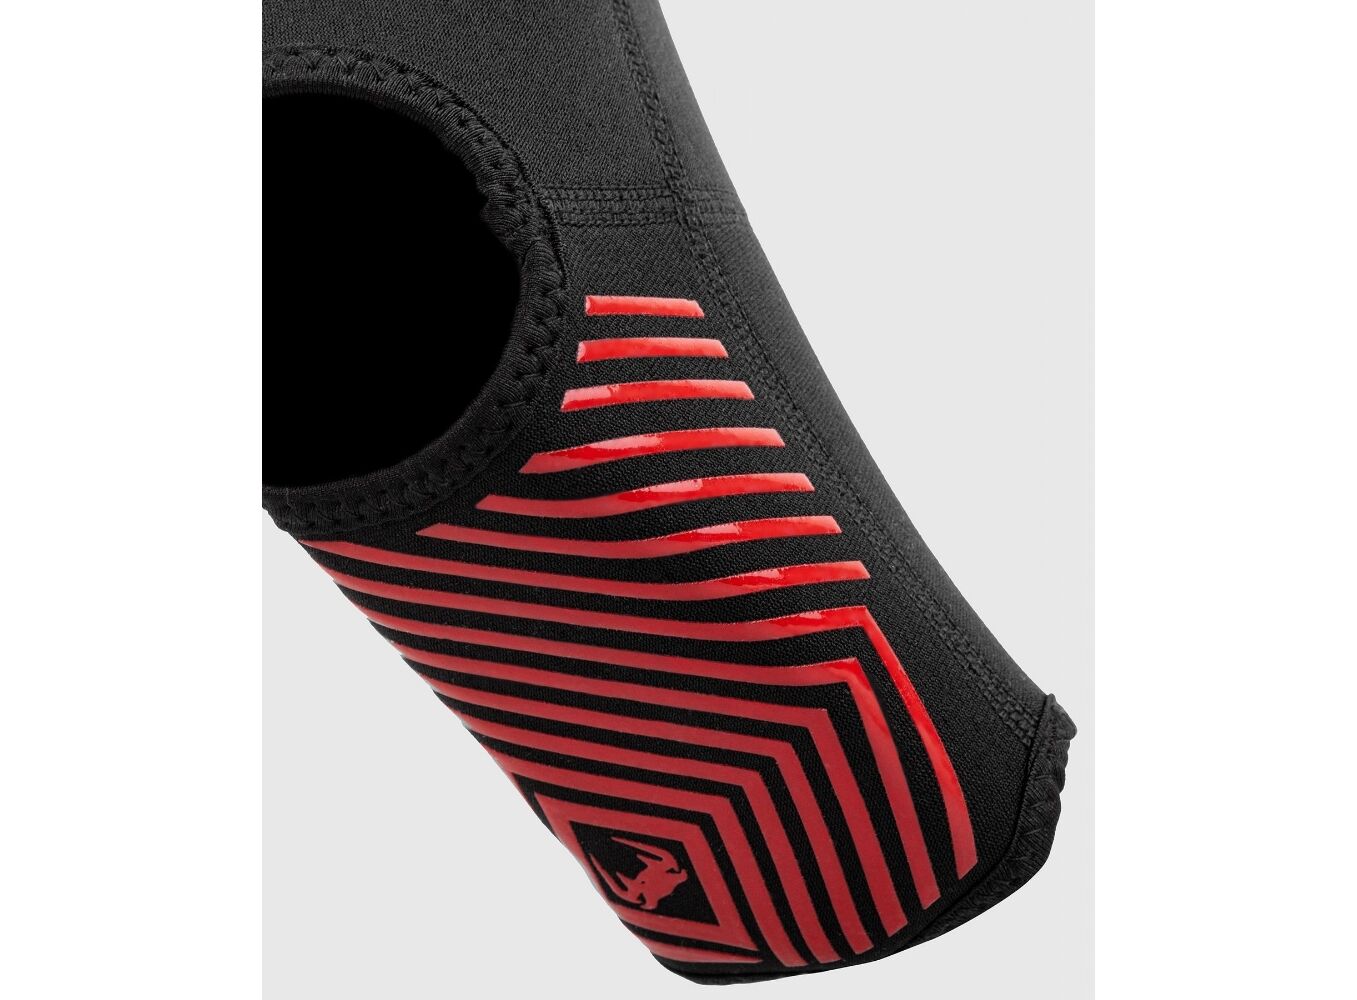 Venum Foot Kontact Evo Grips Ankle Guards 